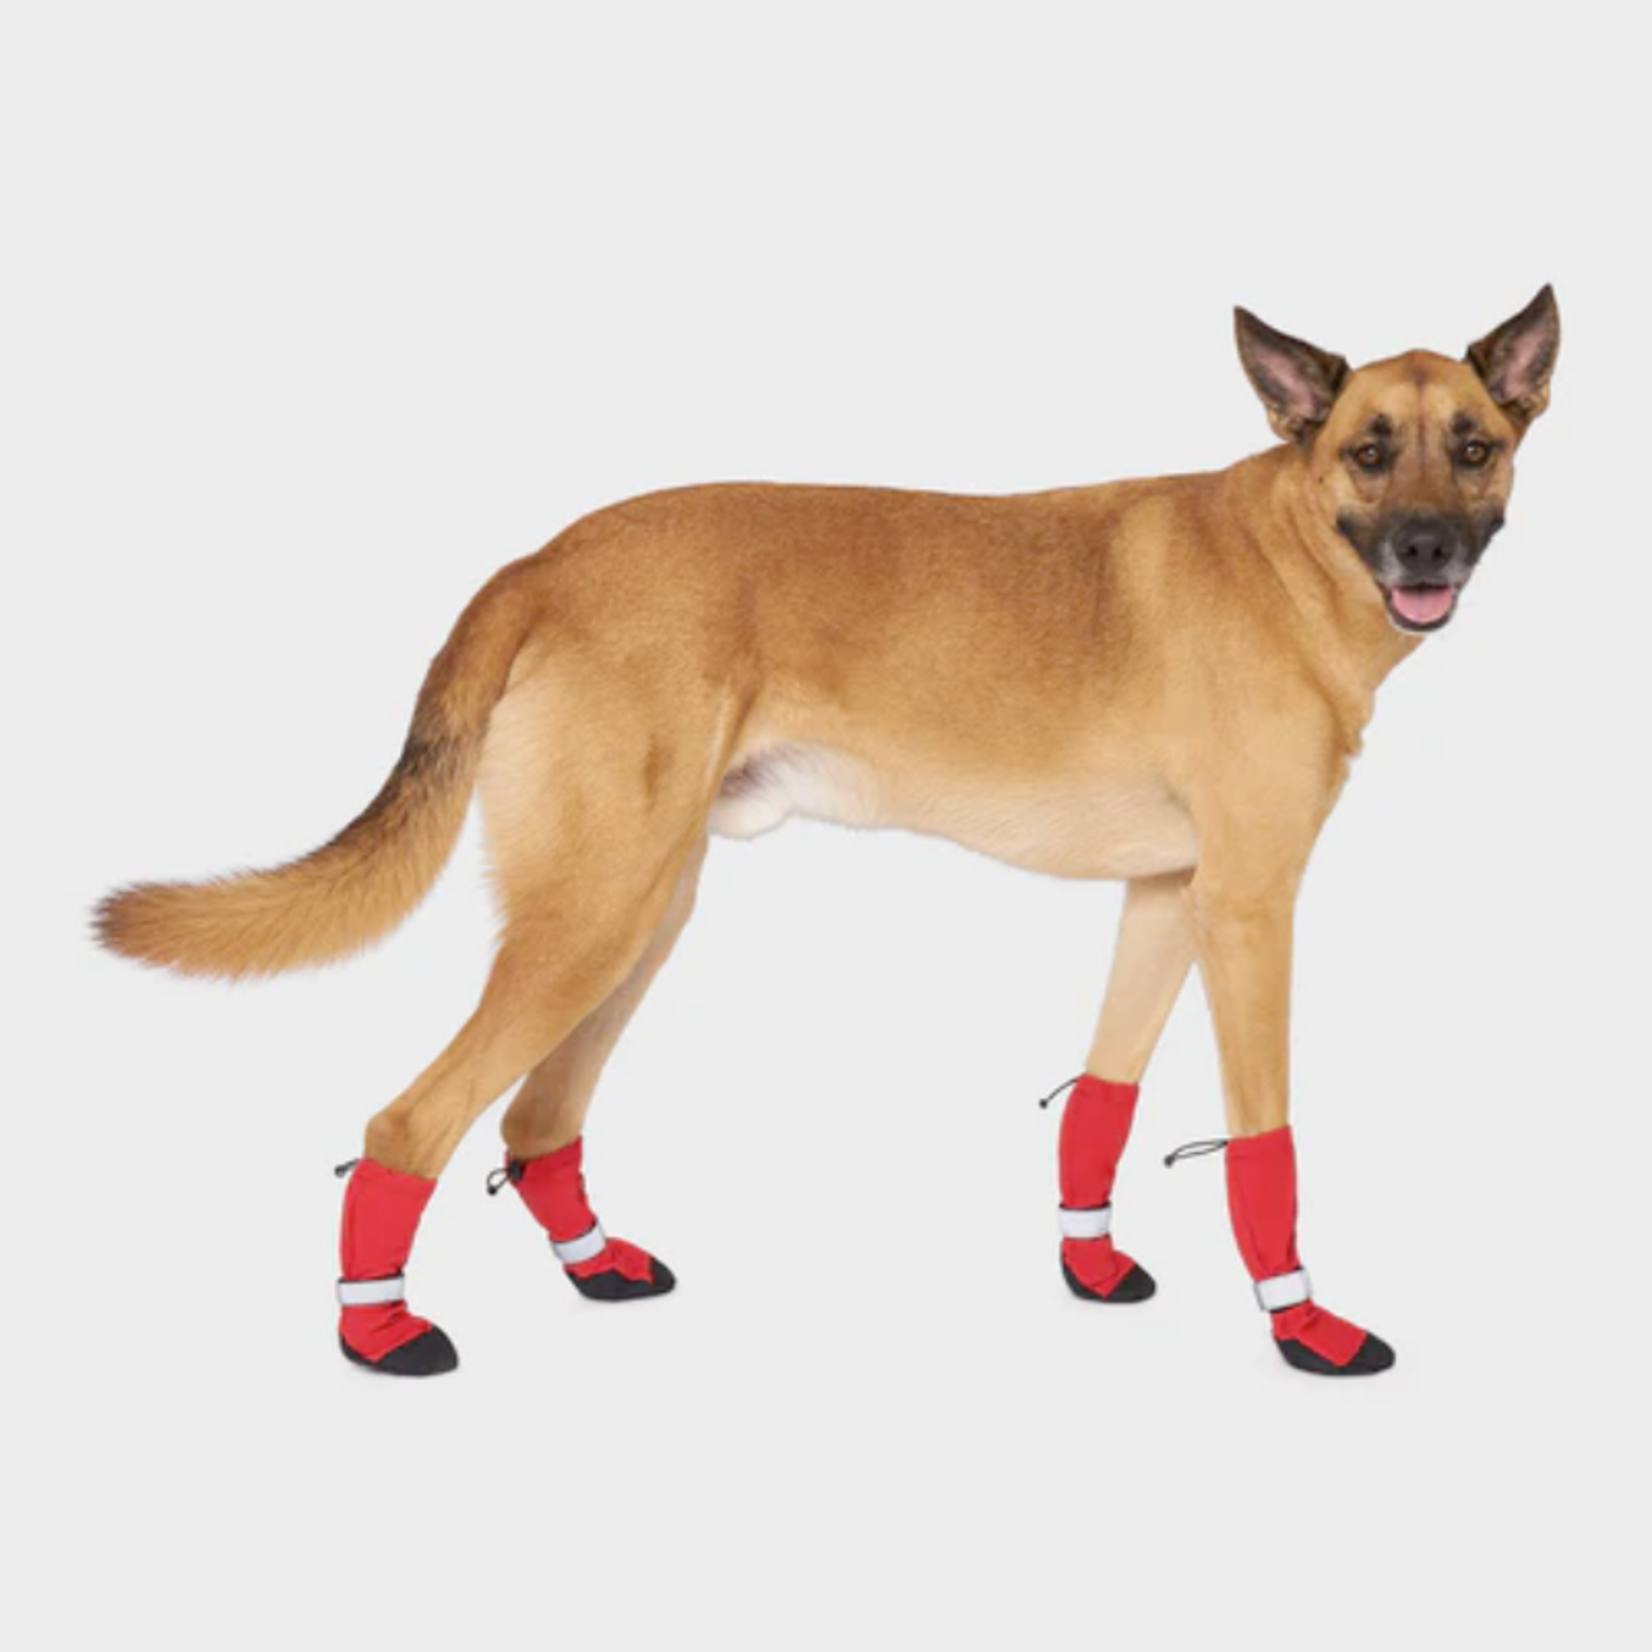 Canada Pooch Soft Shield Boots for Dogs - Black or Red - Canada Pooch